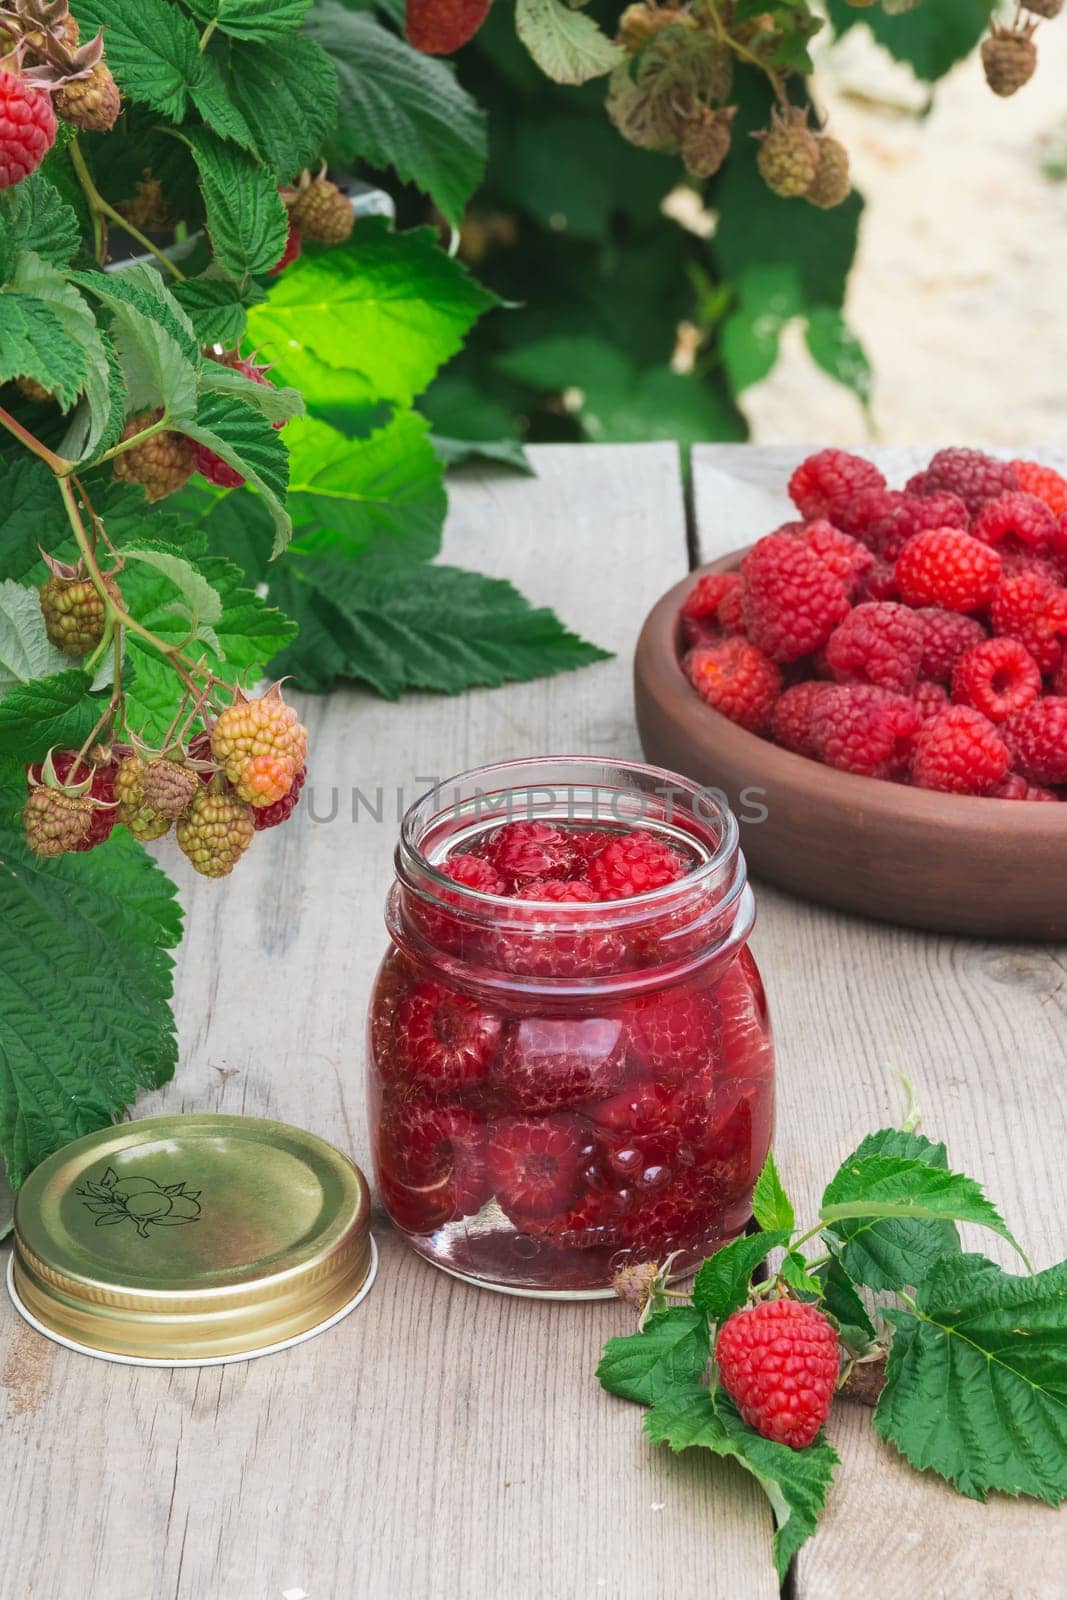 Raspberry berry fresh in a clay plate and in a jar for preservation on a wooden table